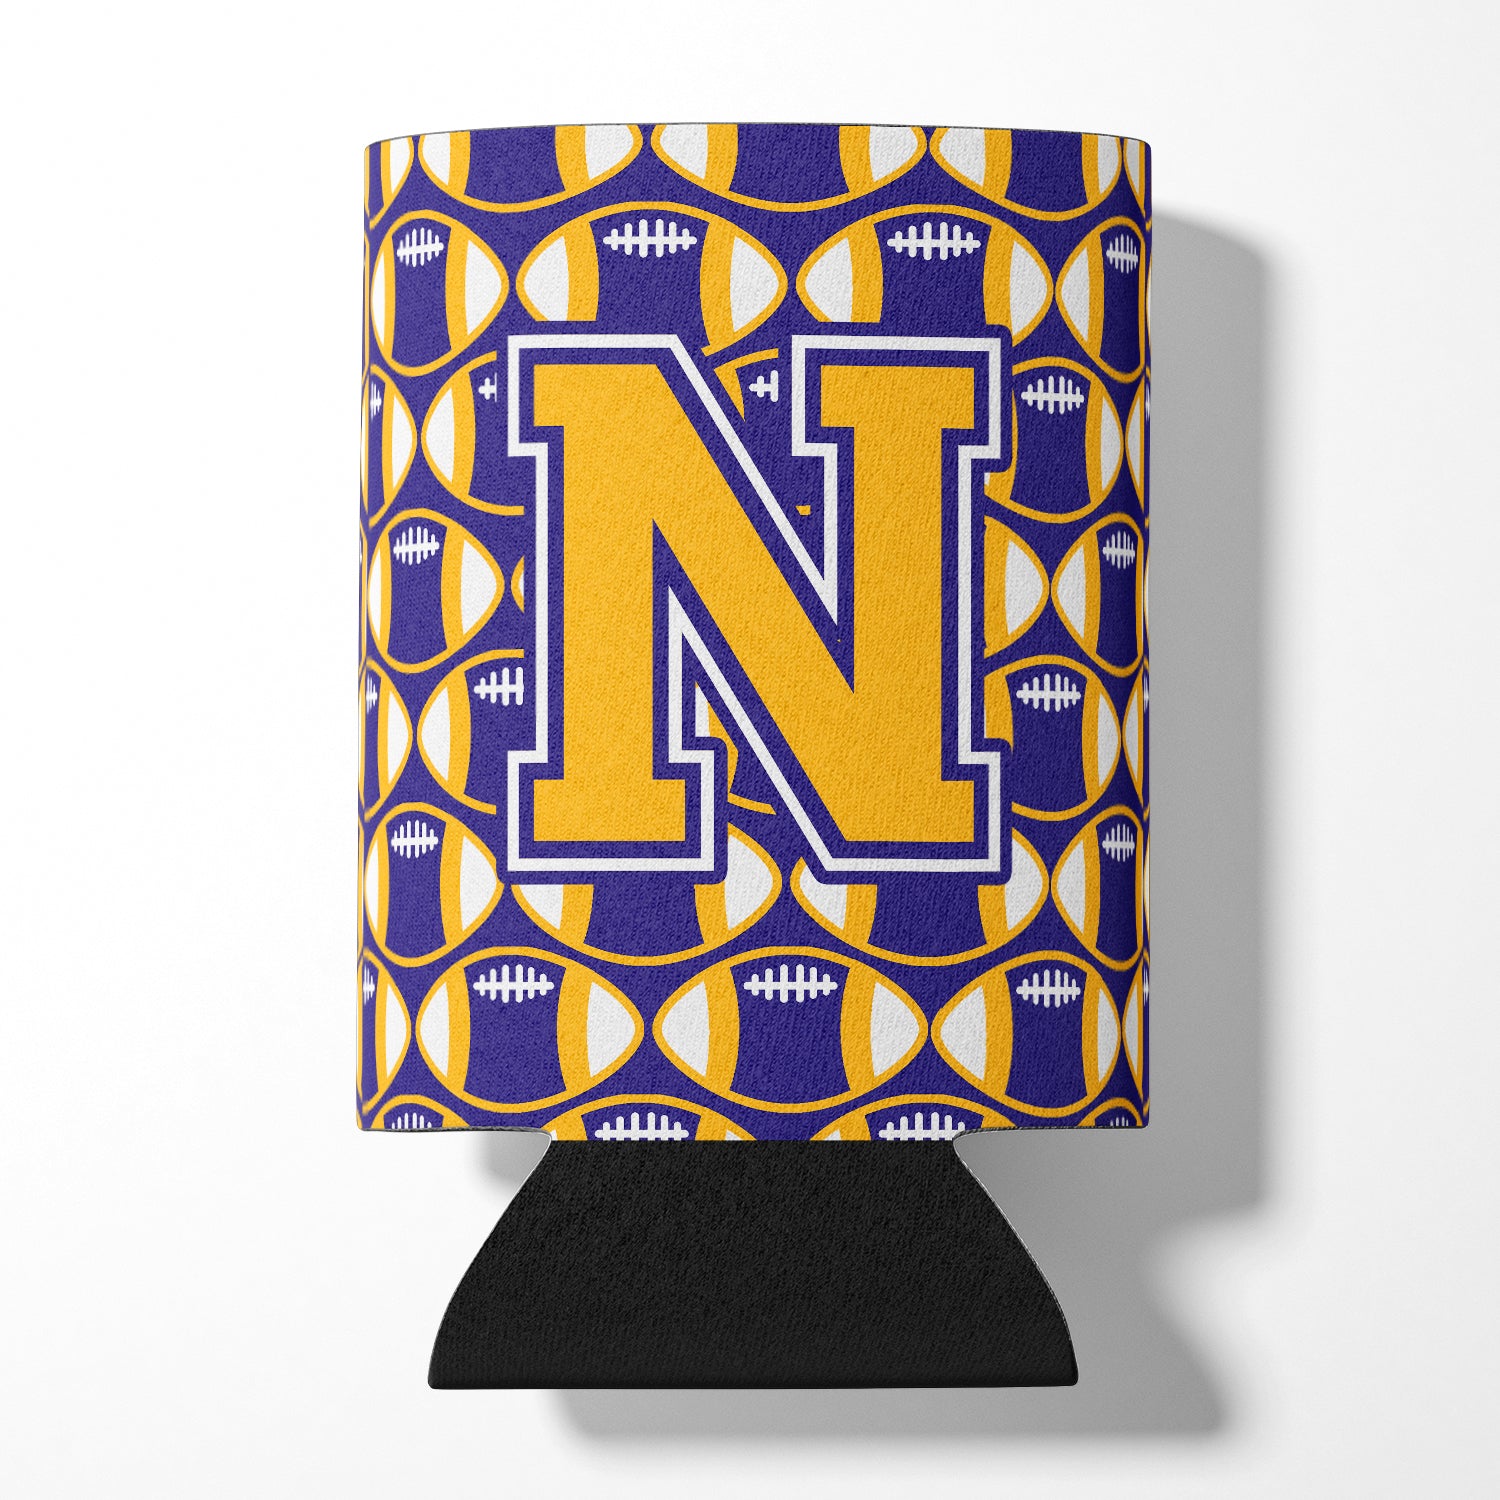 Letter N Football Purple and Gold Can or Bottle Hugger CJ1064-NCC.